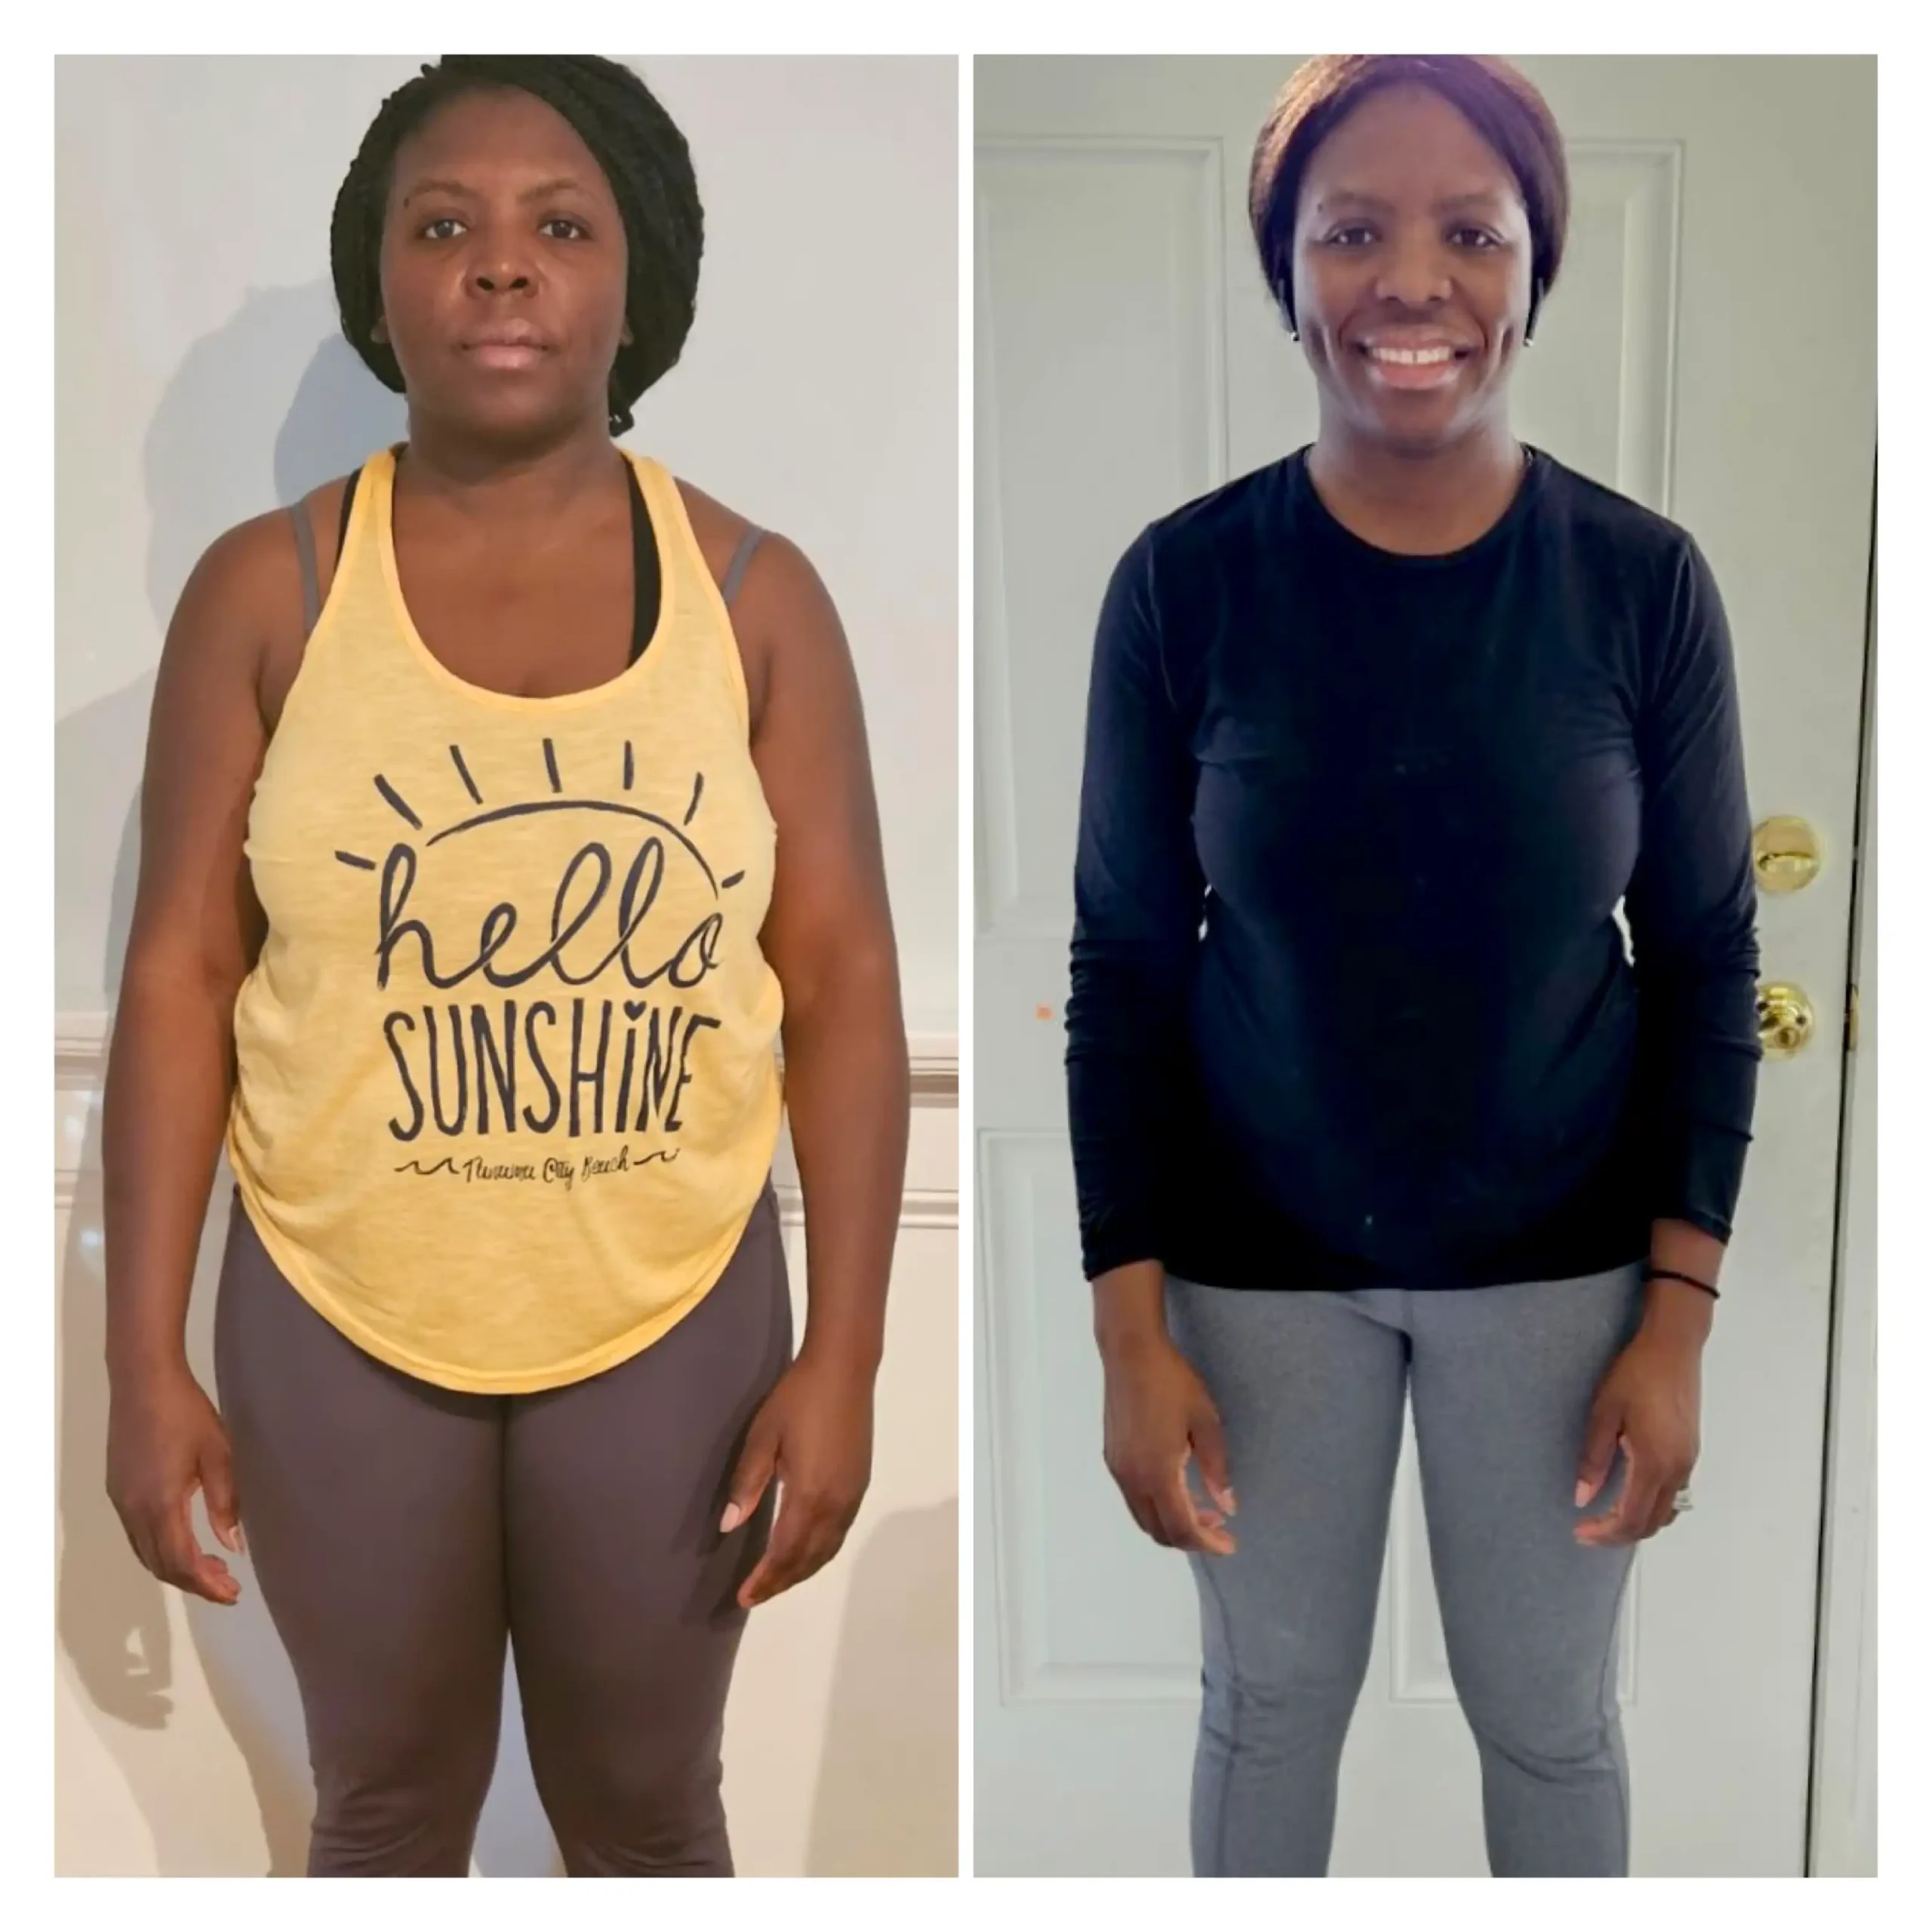 Tamara before and after weight loss front view